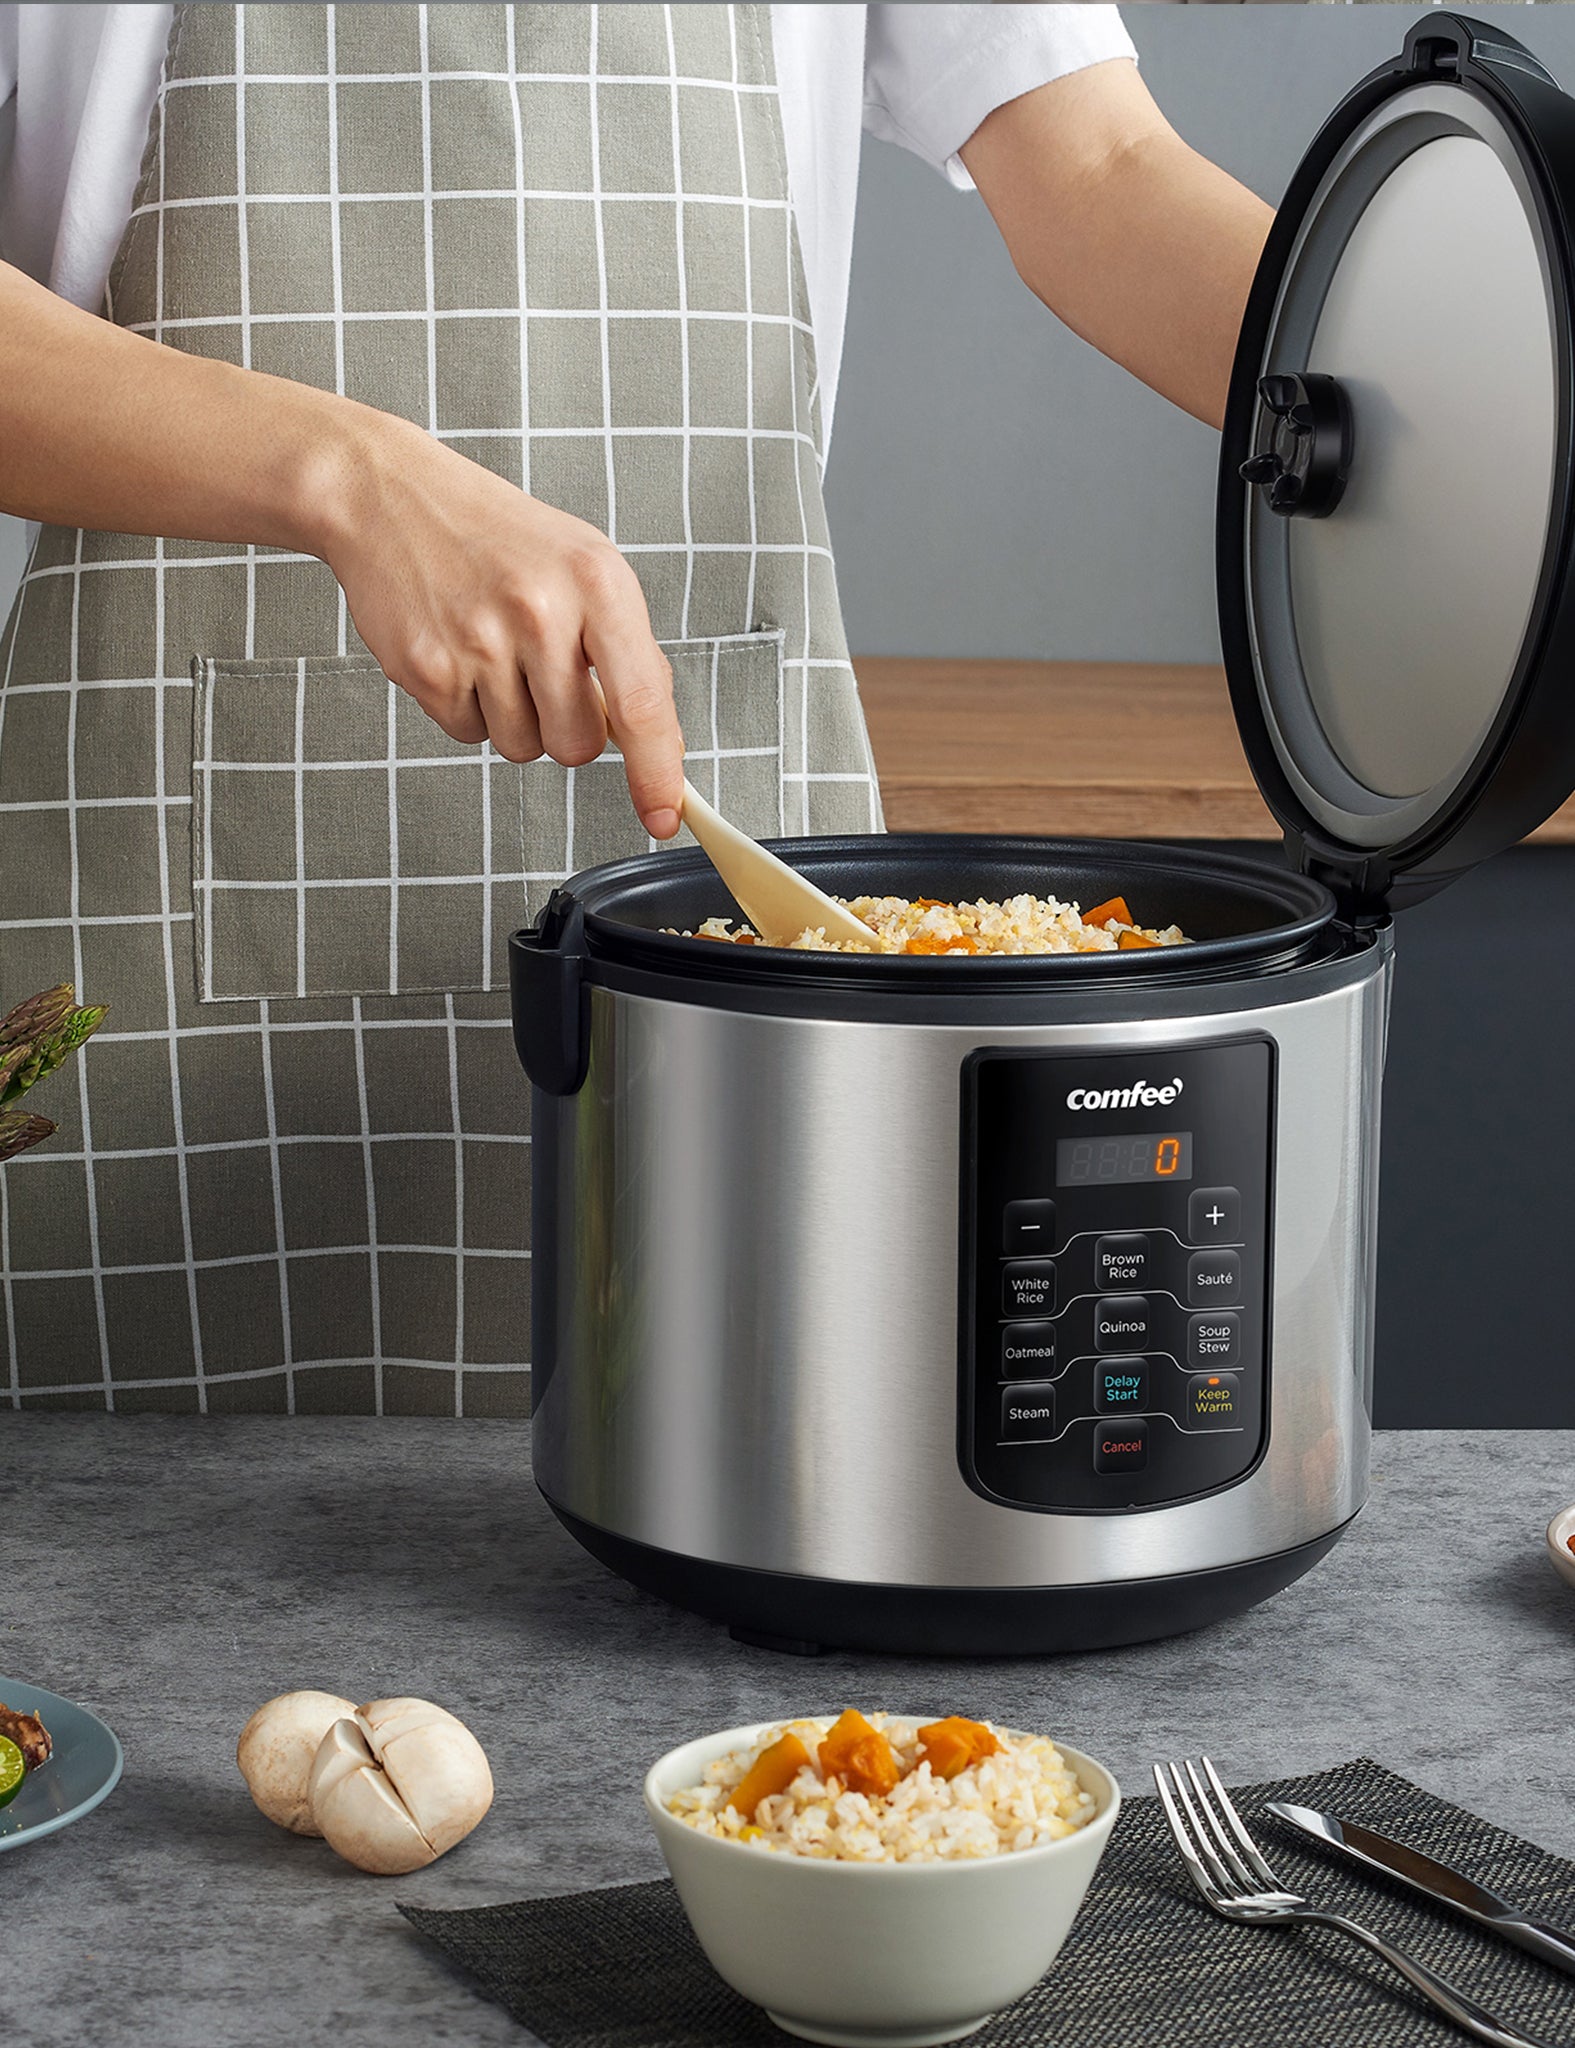 Electric Rice Cooker with Stainless Steel Inner Pot Makes Soups